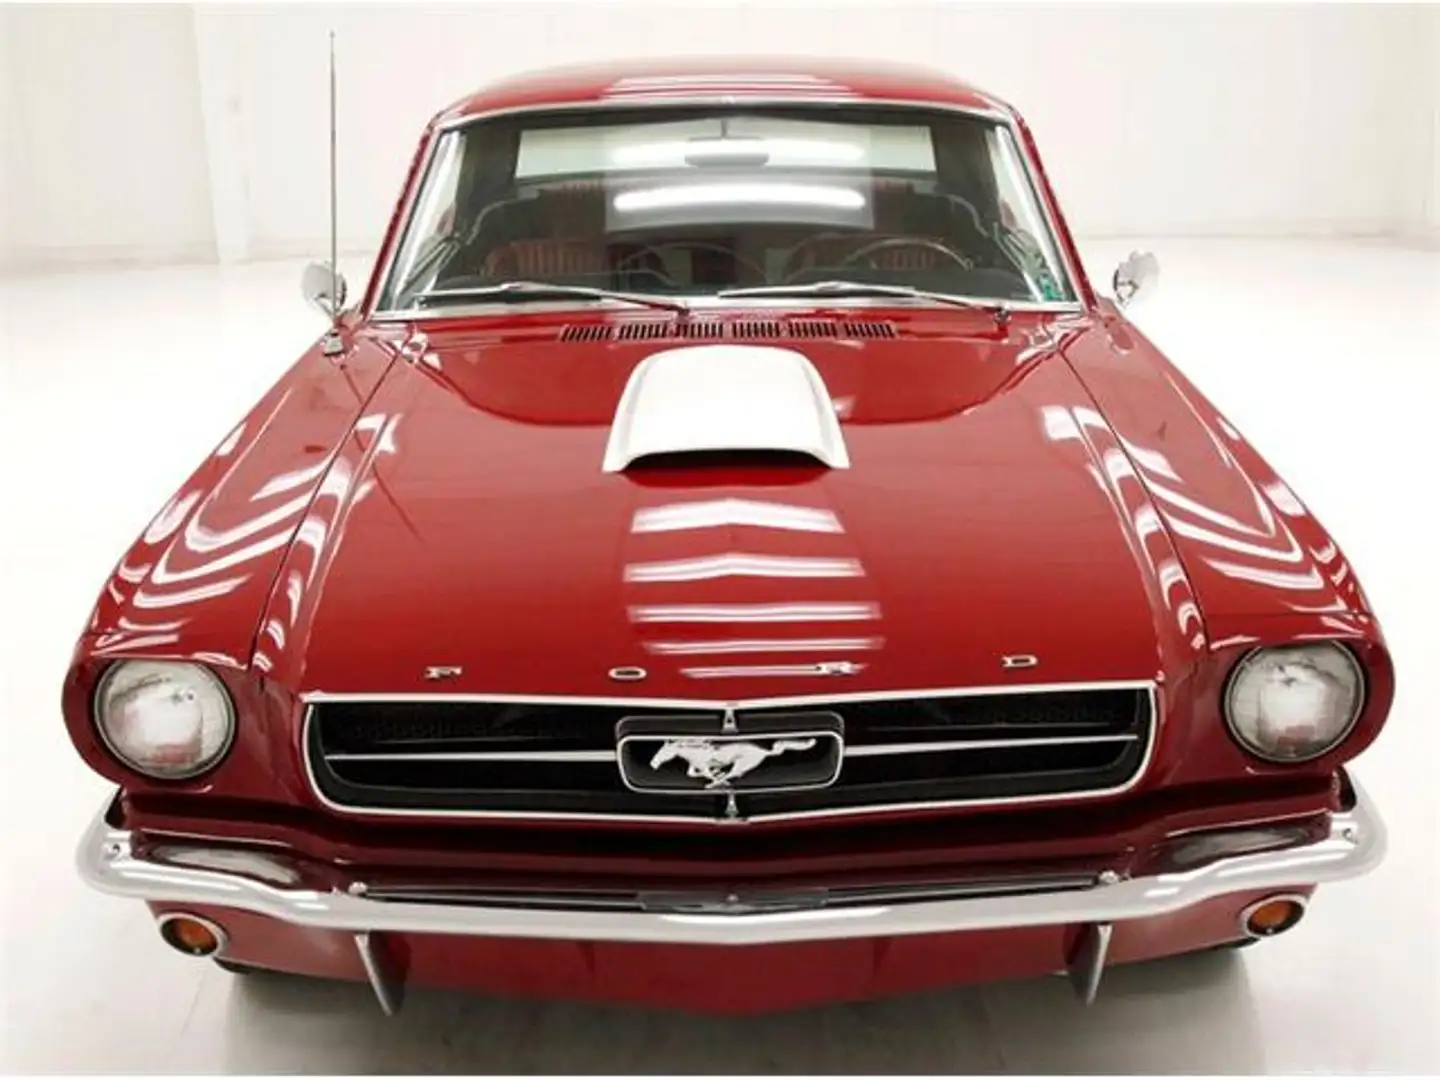 Ford Mustang COUPE 1965 dossier complet au 0651552080 - 1